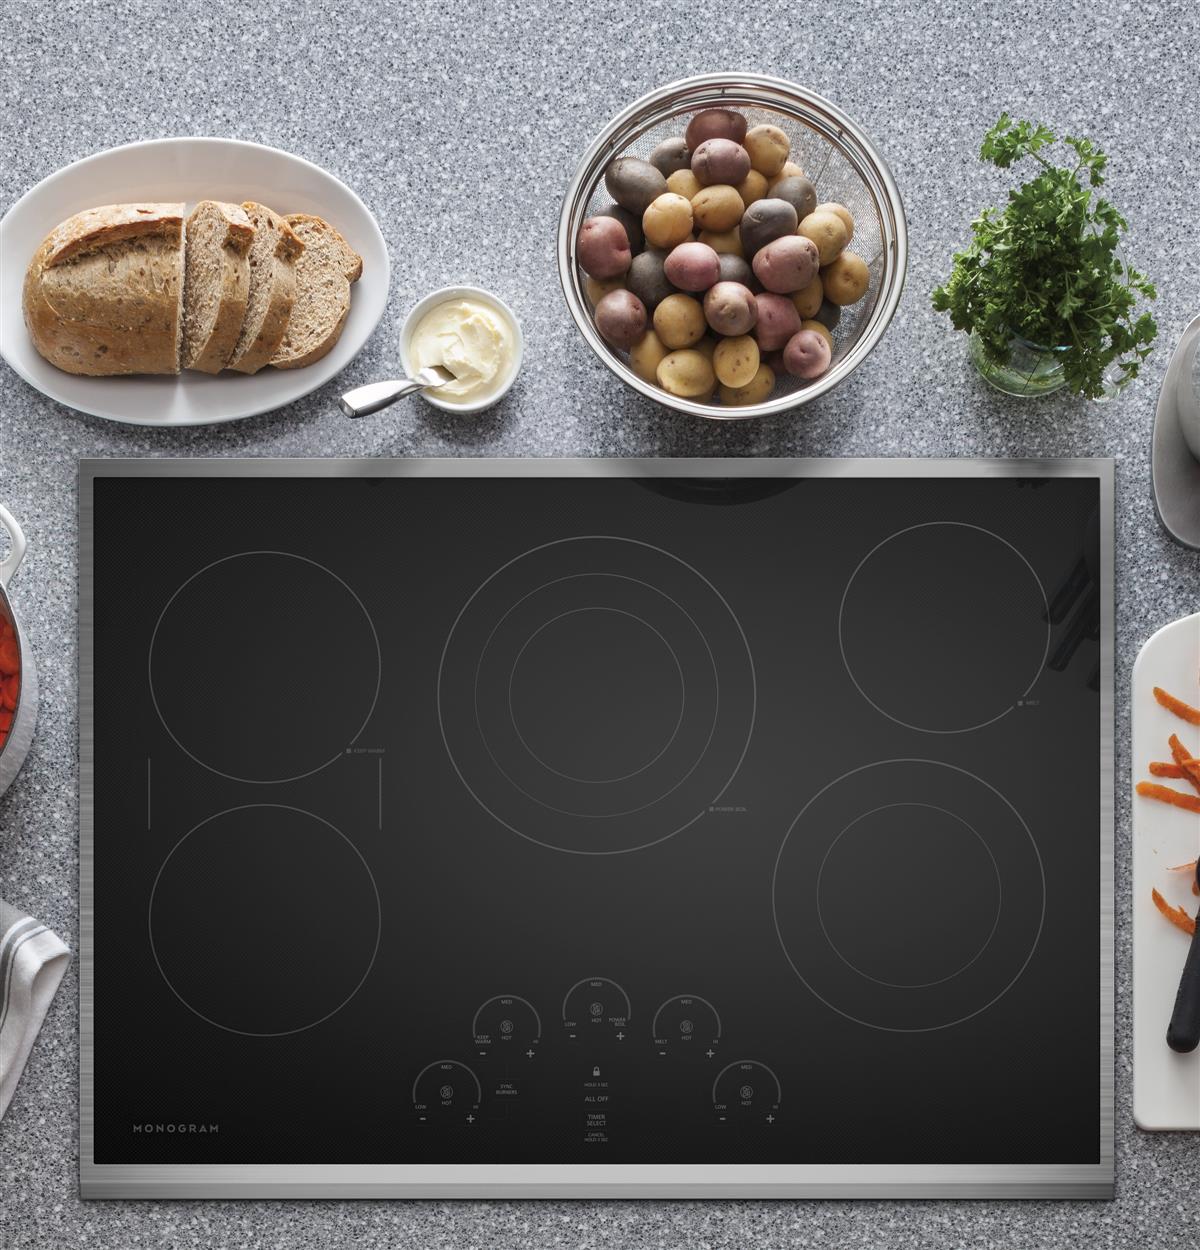 Monogram touch control electric cooktop